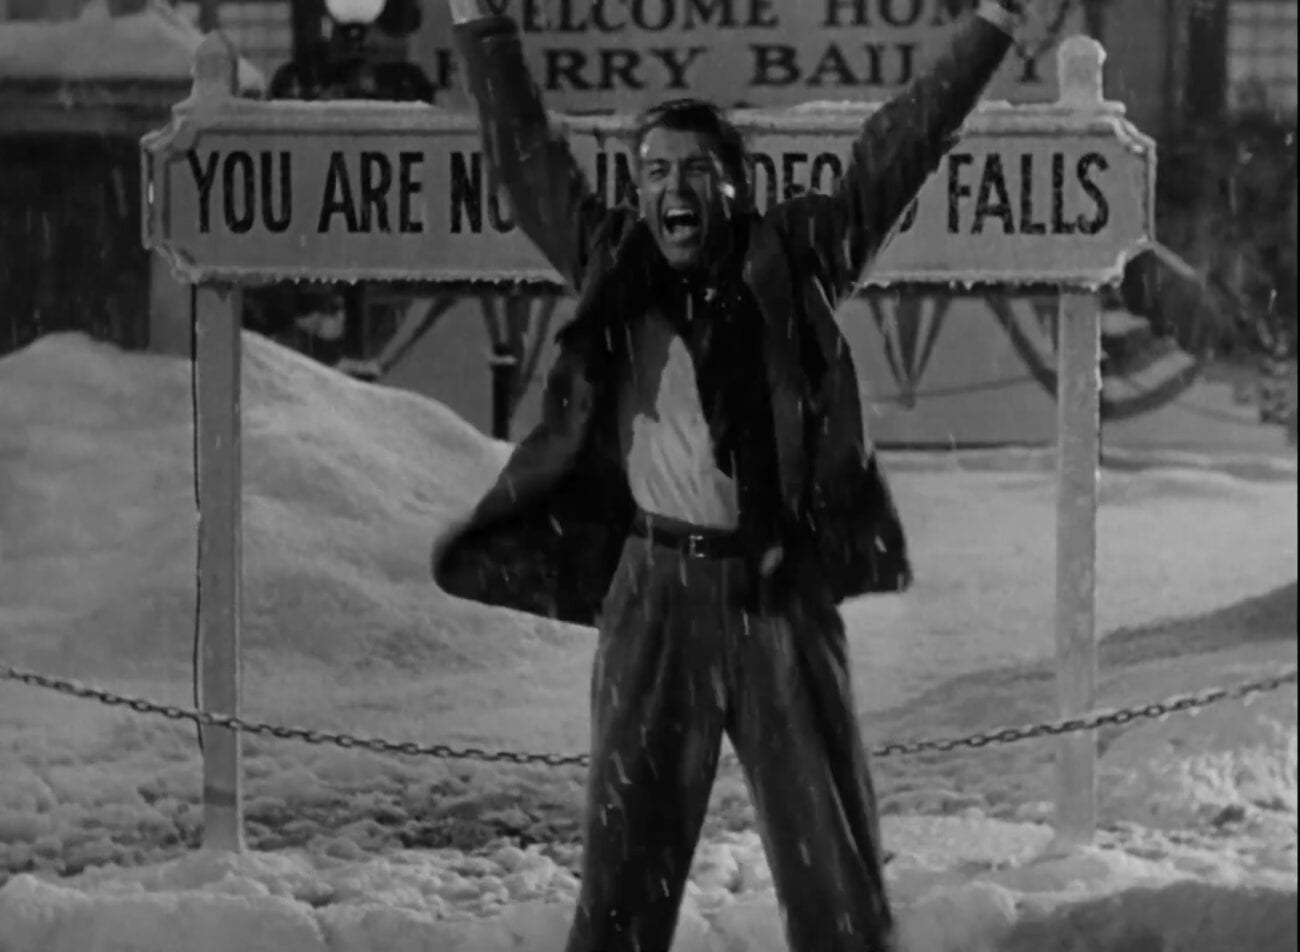 George Bailey stands triumphant in front of Bedford Falls sign